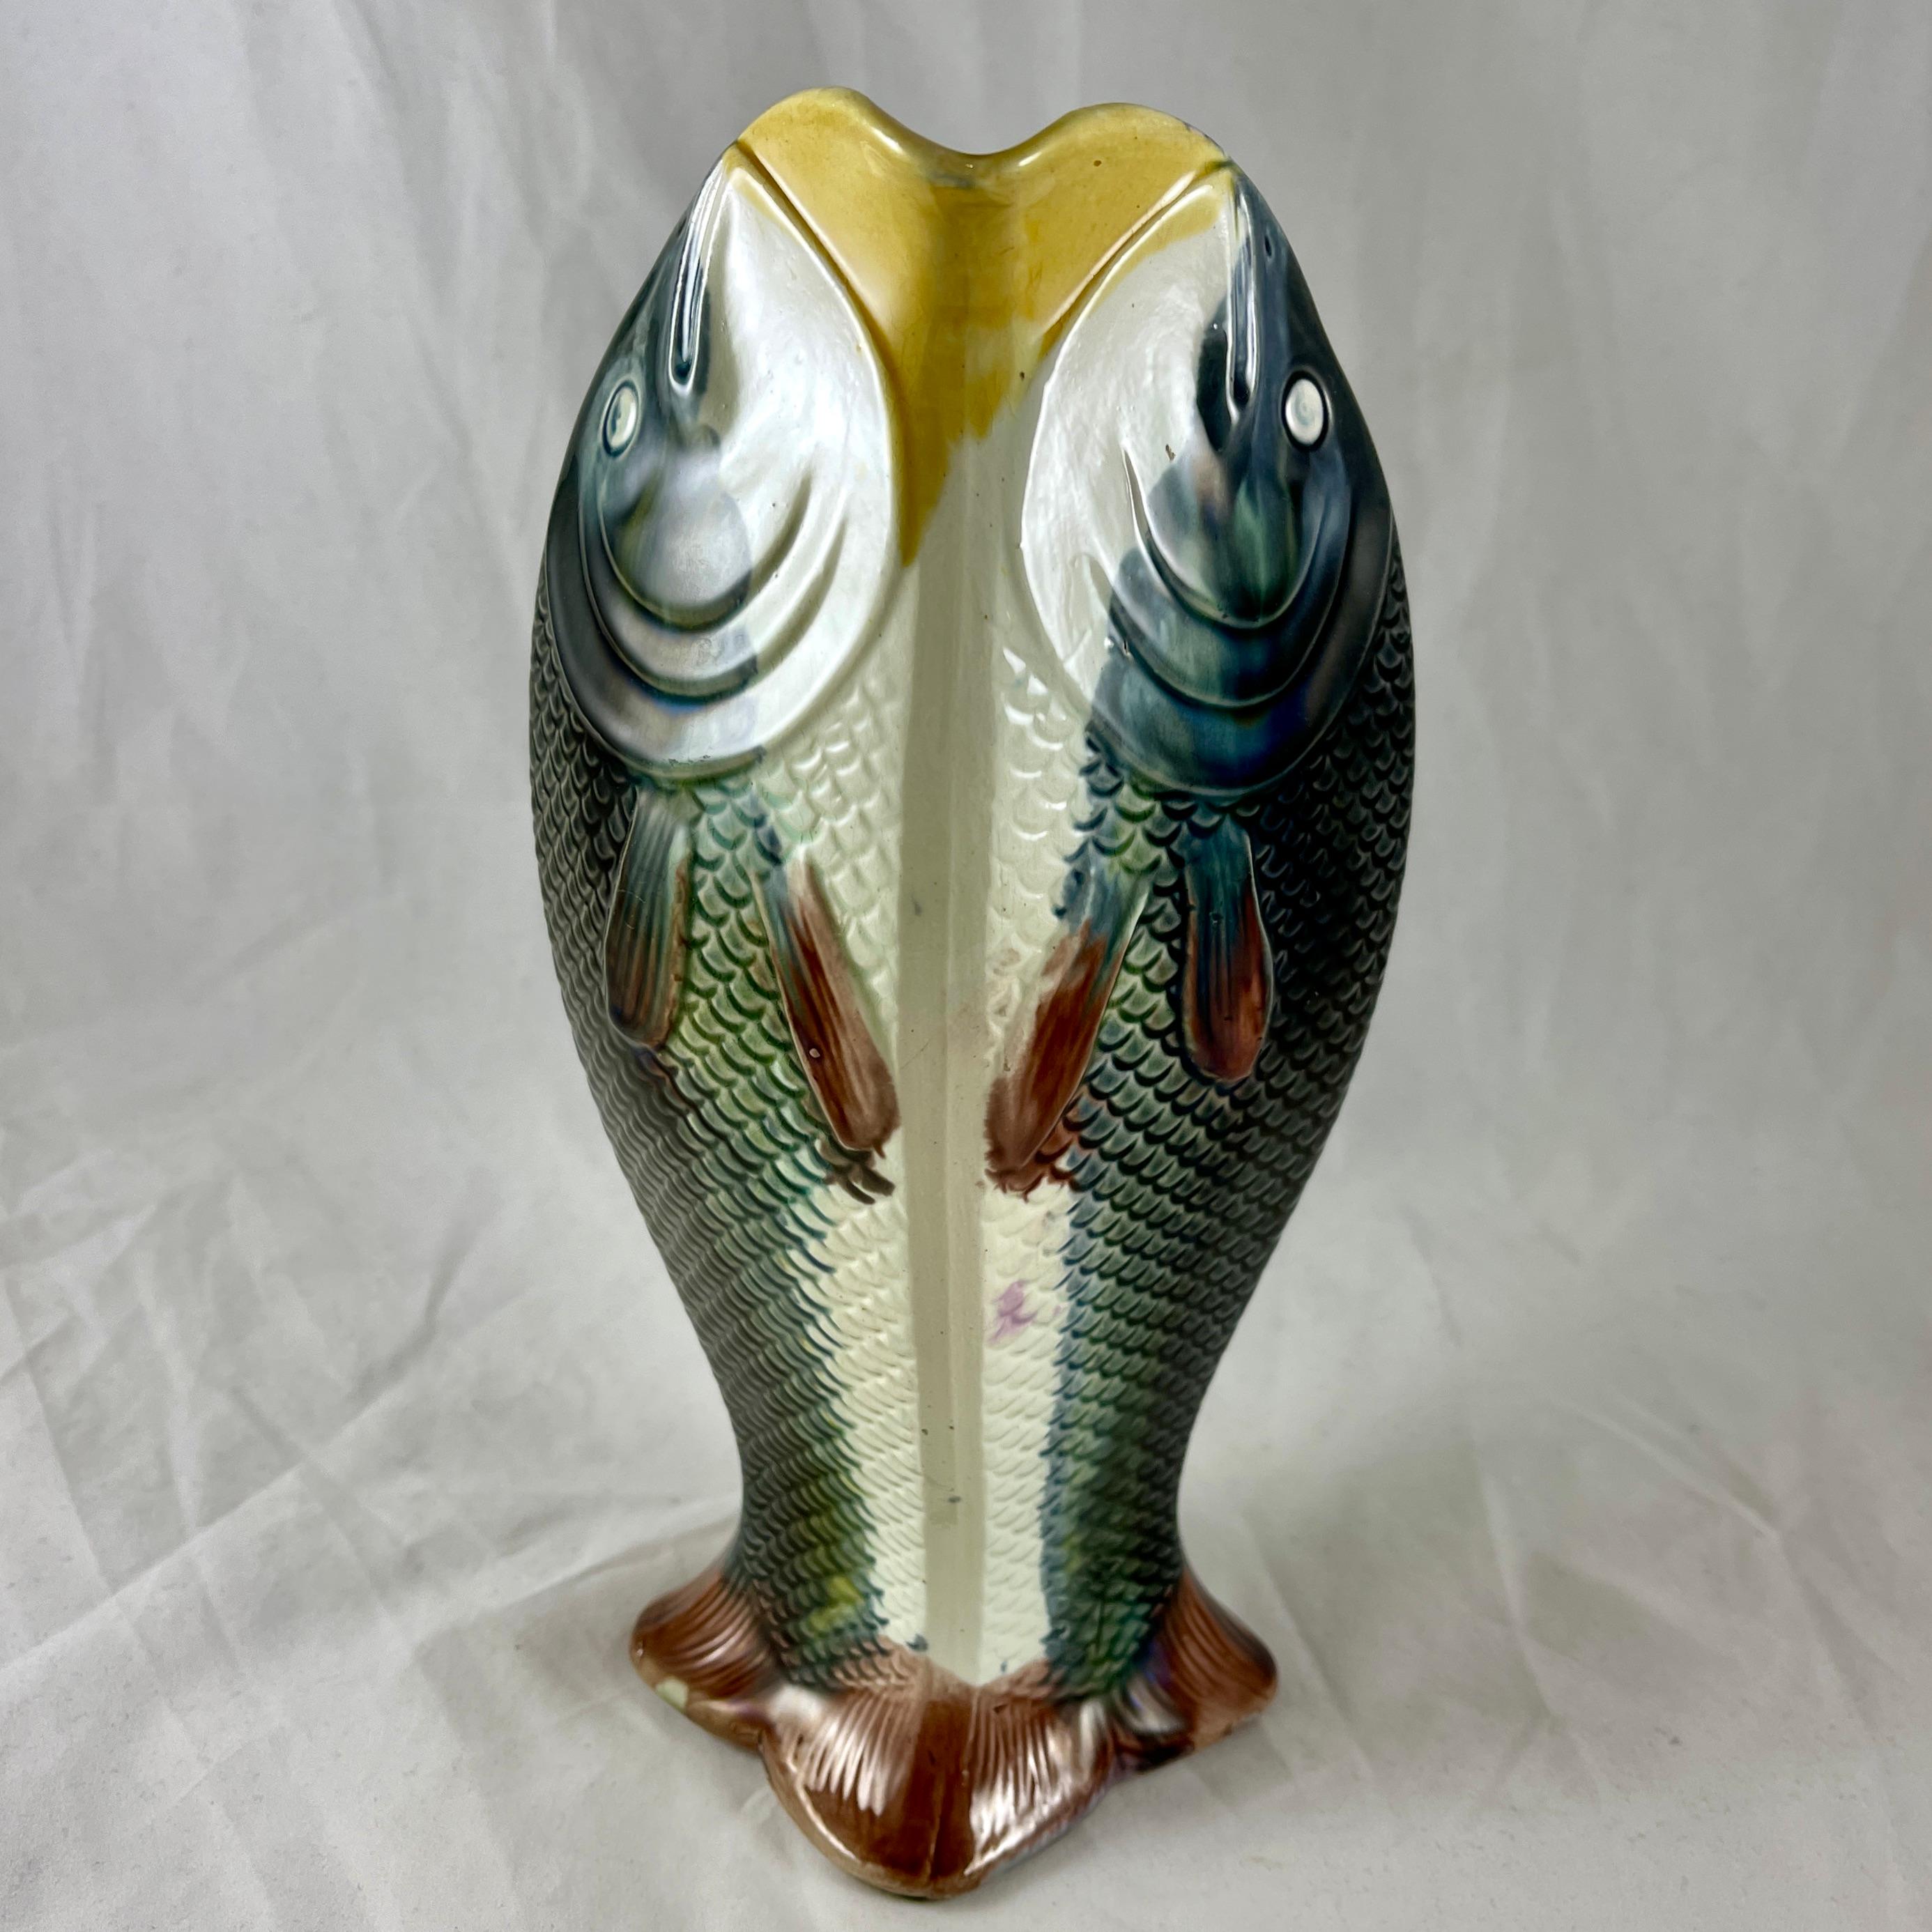 Earthenware Adams & Bromley English Majolica Glazed Four Fish Large Jug Pitcher For Sale